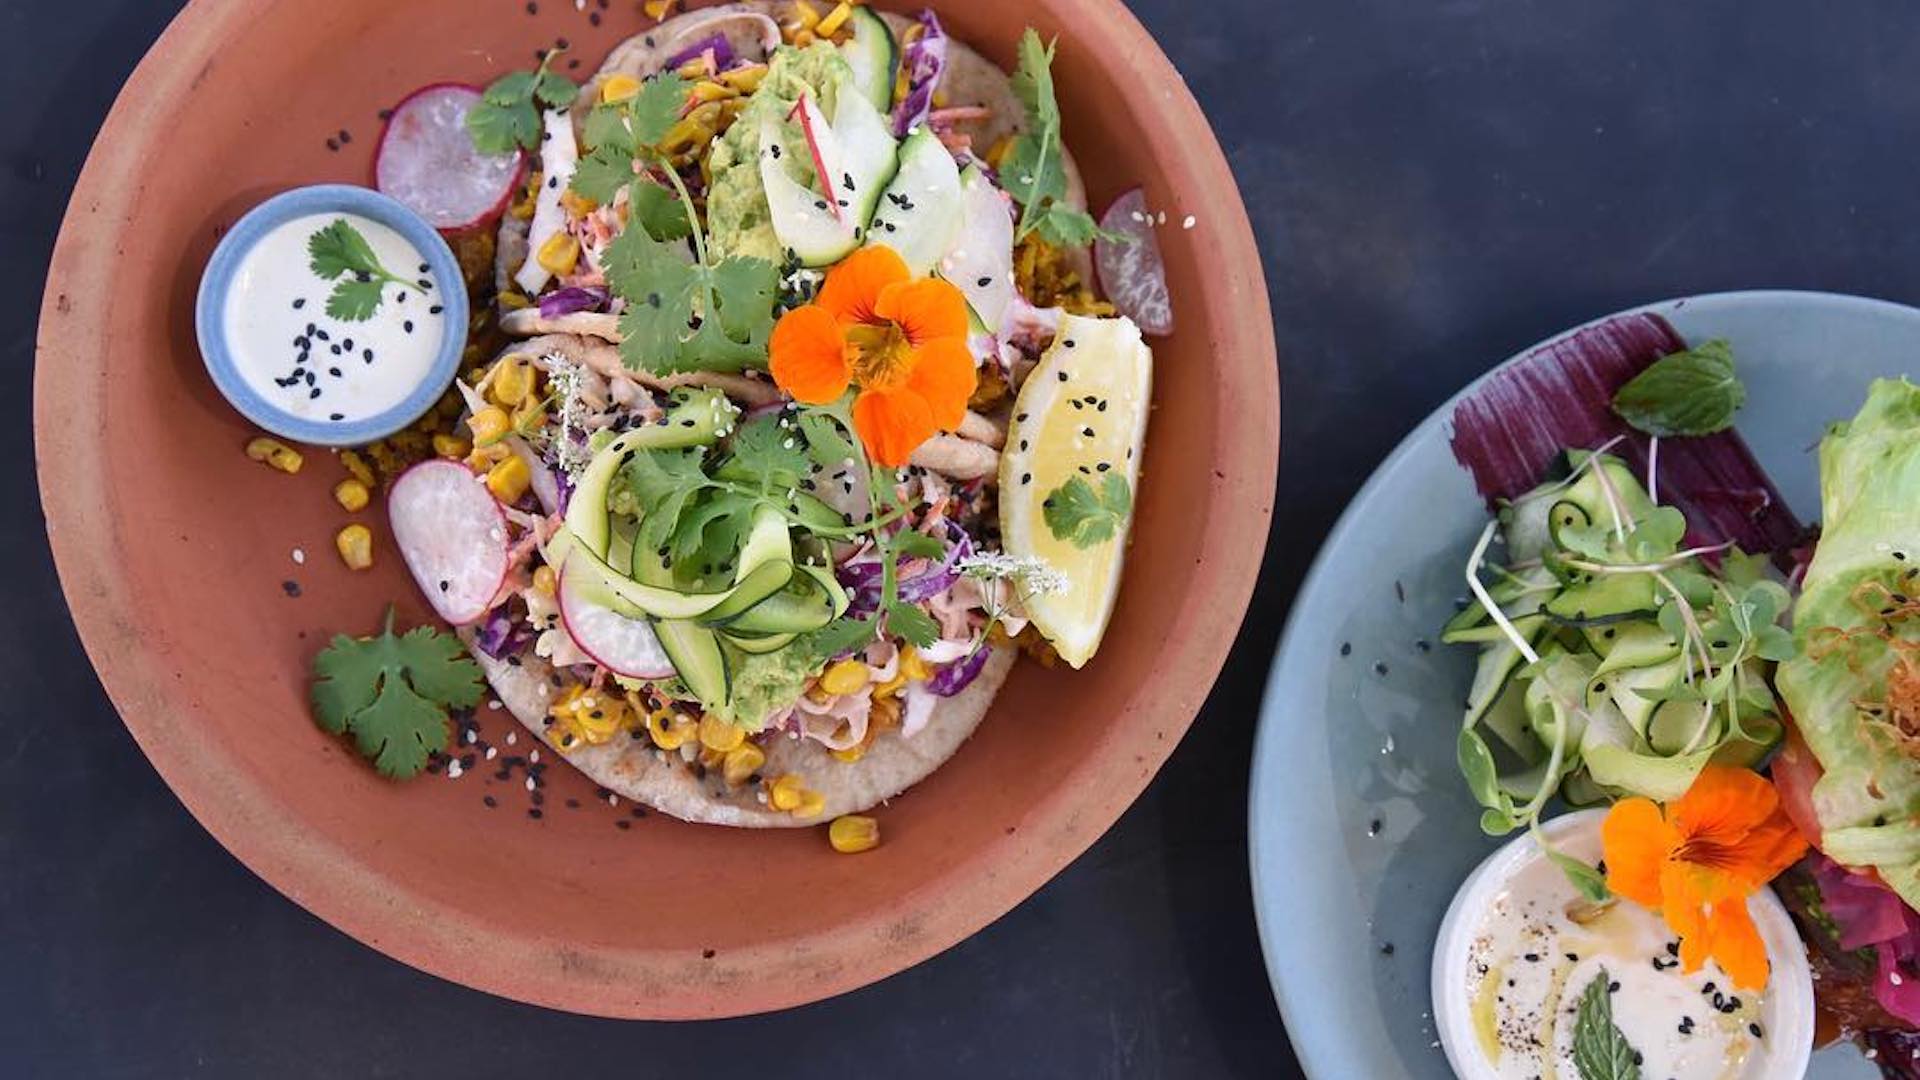 Cafes in QLD with gluten-free menus: Marie Anita's. Image of flatbreads topped with corn, avocado, radishes, coriander, orange edible flowers and served with lemon wedges